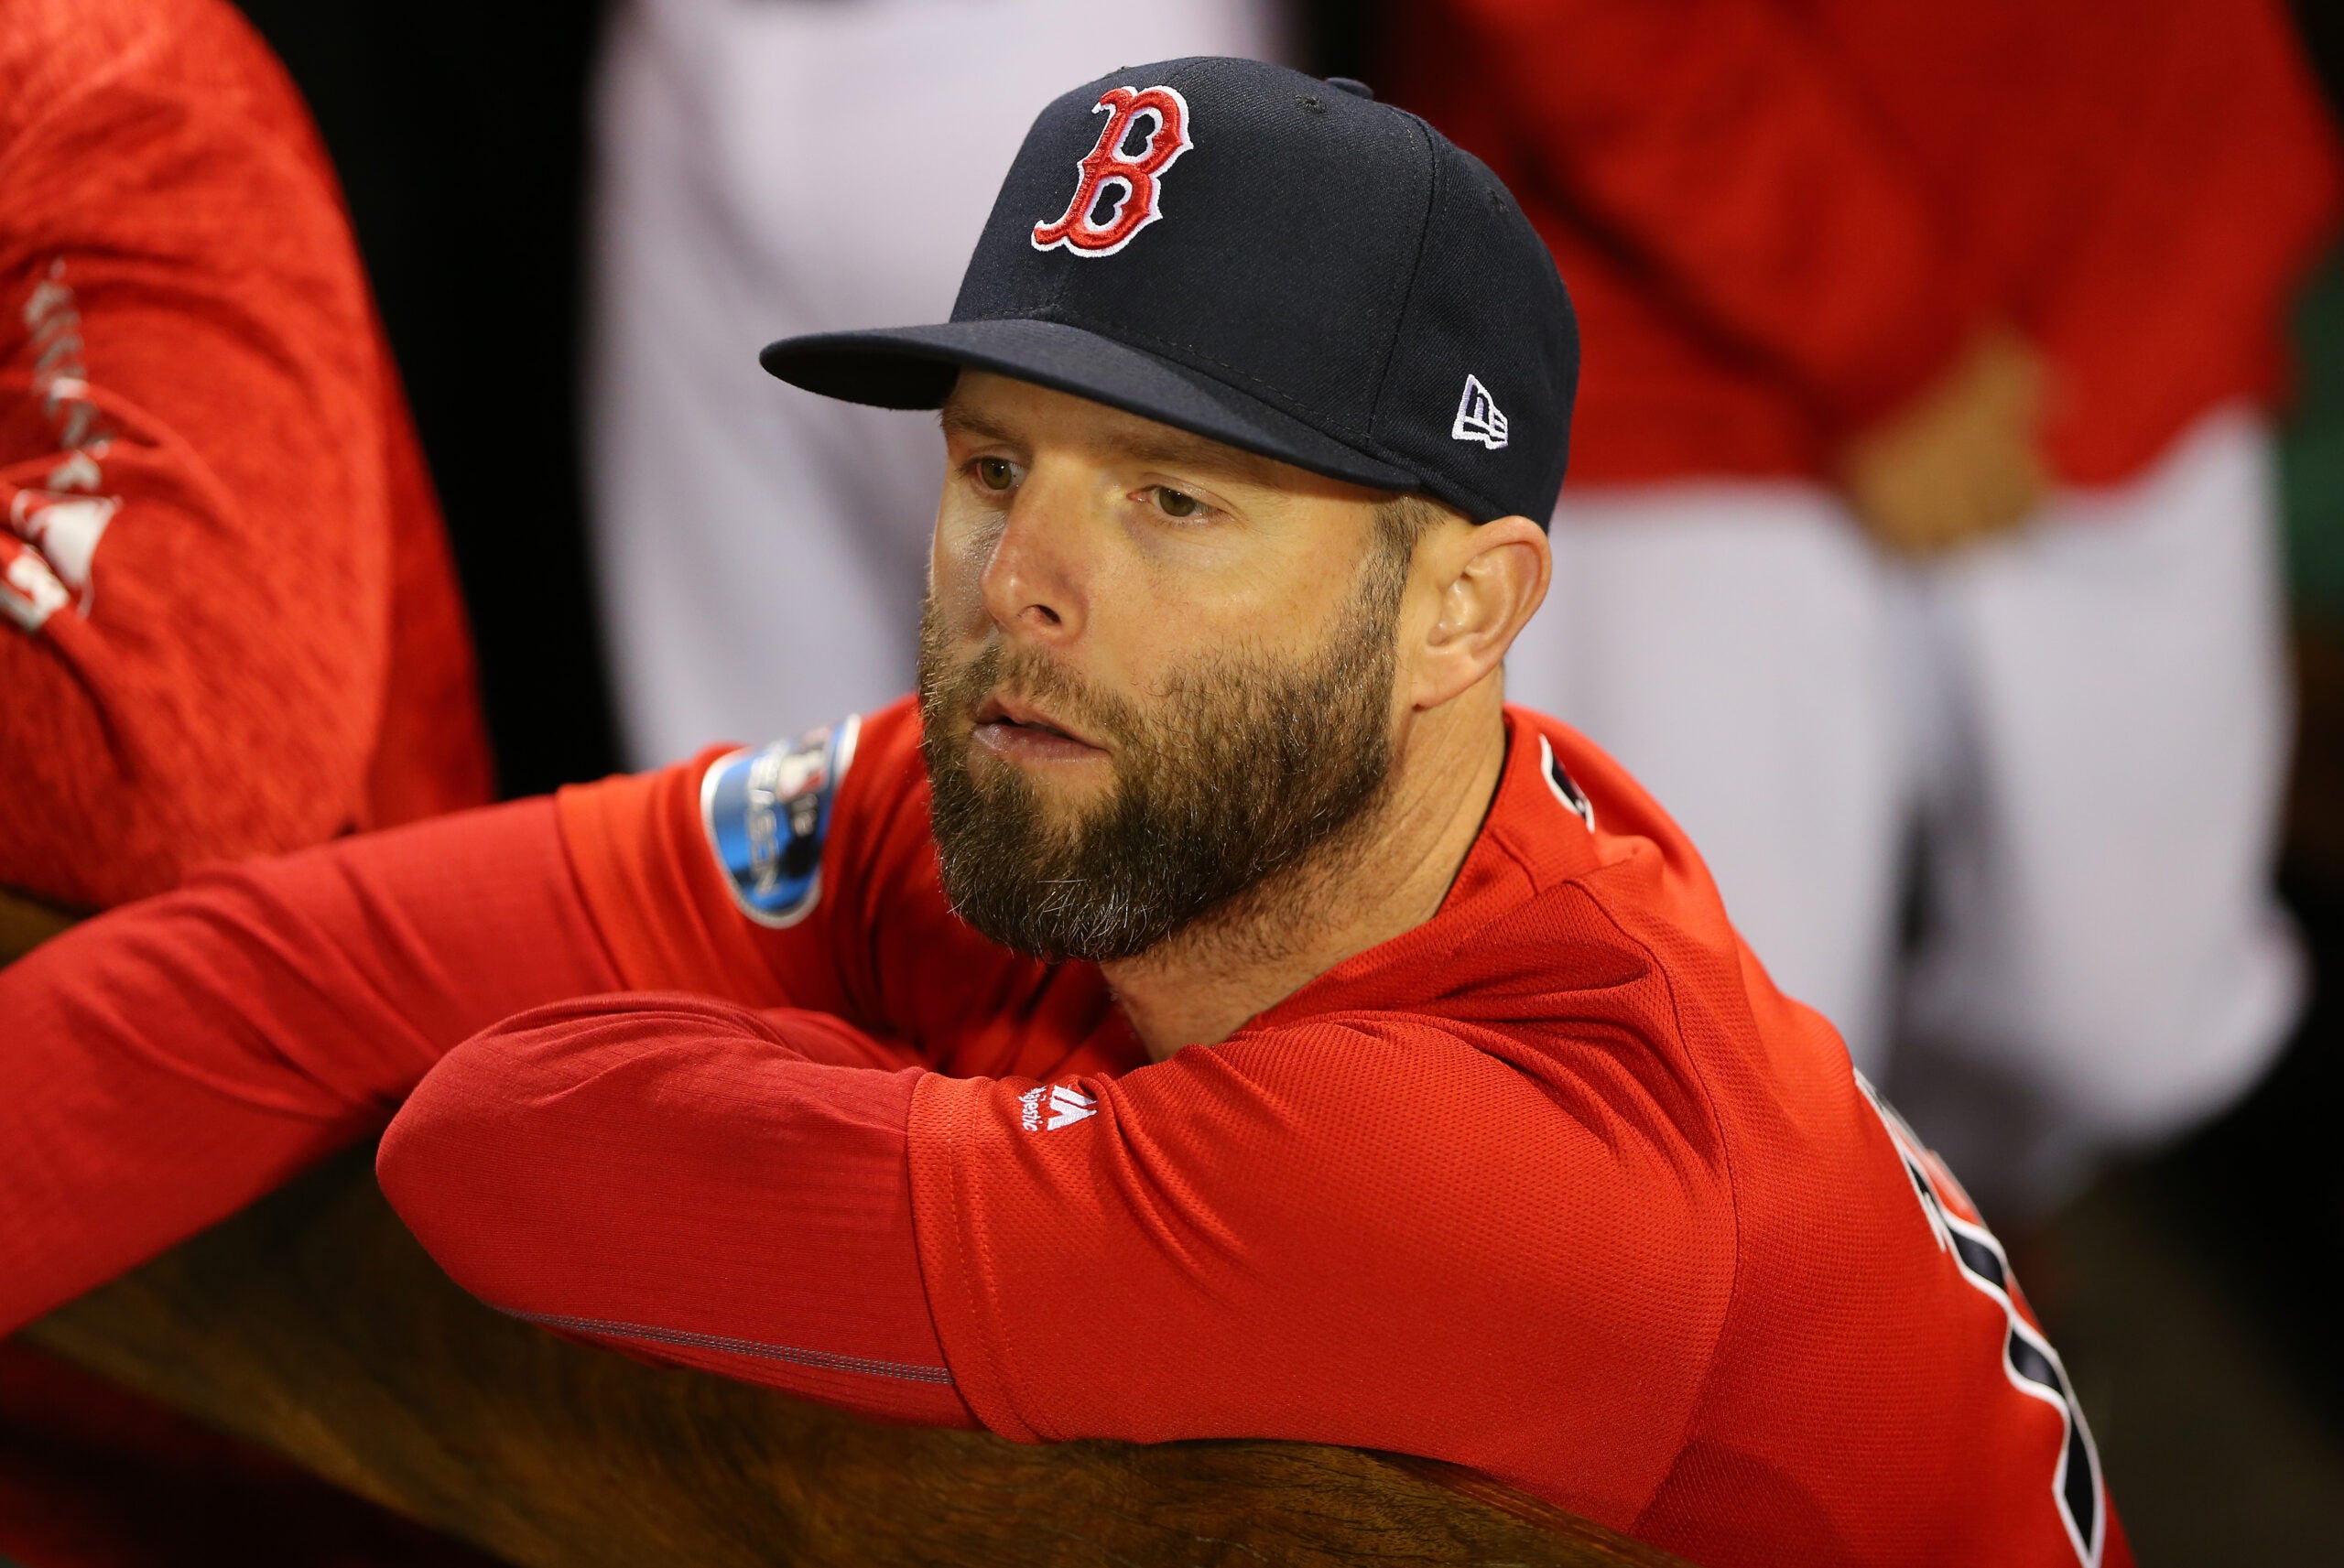 Dustin Pedroia plays inning in 1st game since May – Daily Democrat